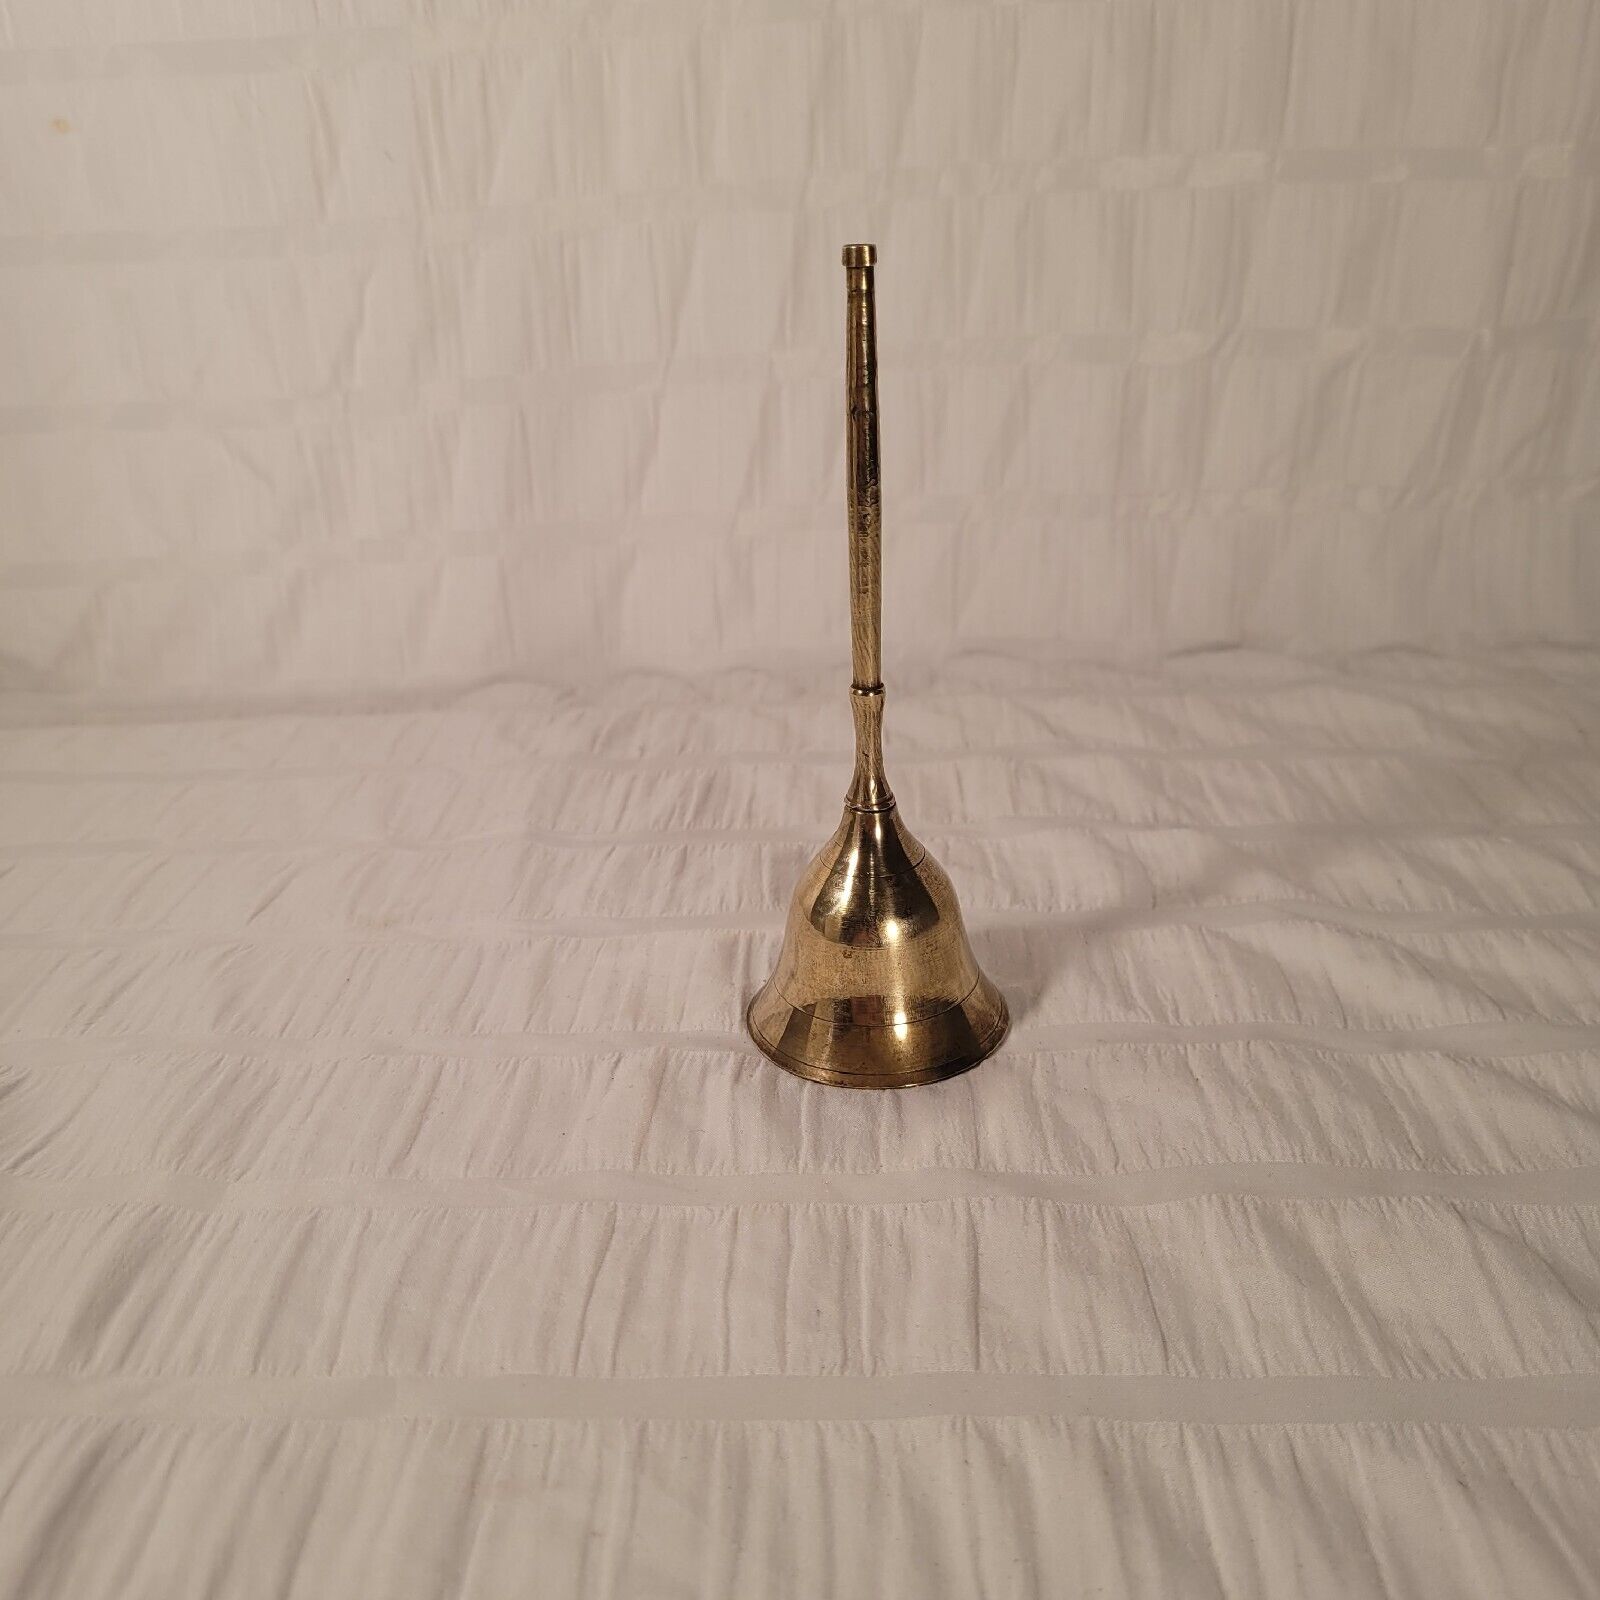 Mid-century Handmade Brass Vintage Teachers Bell with Etched Lines Decor Elegant